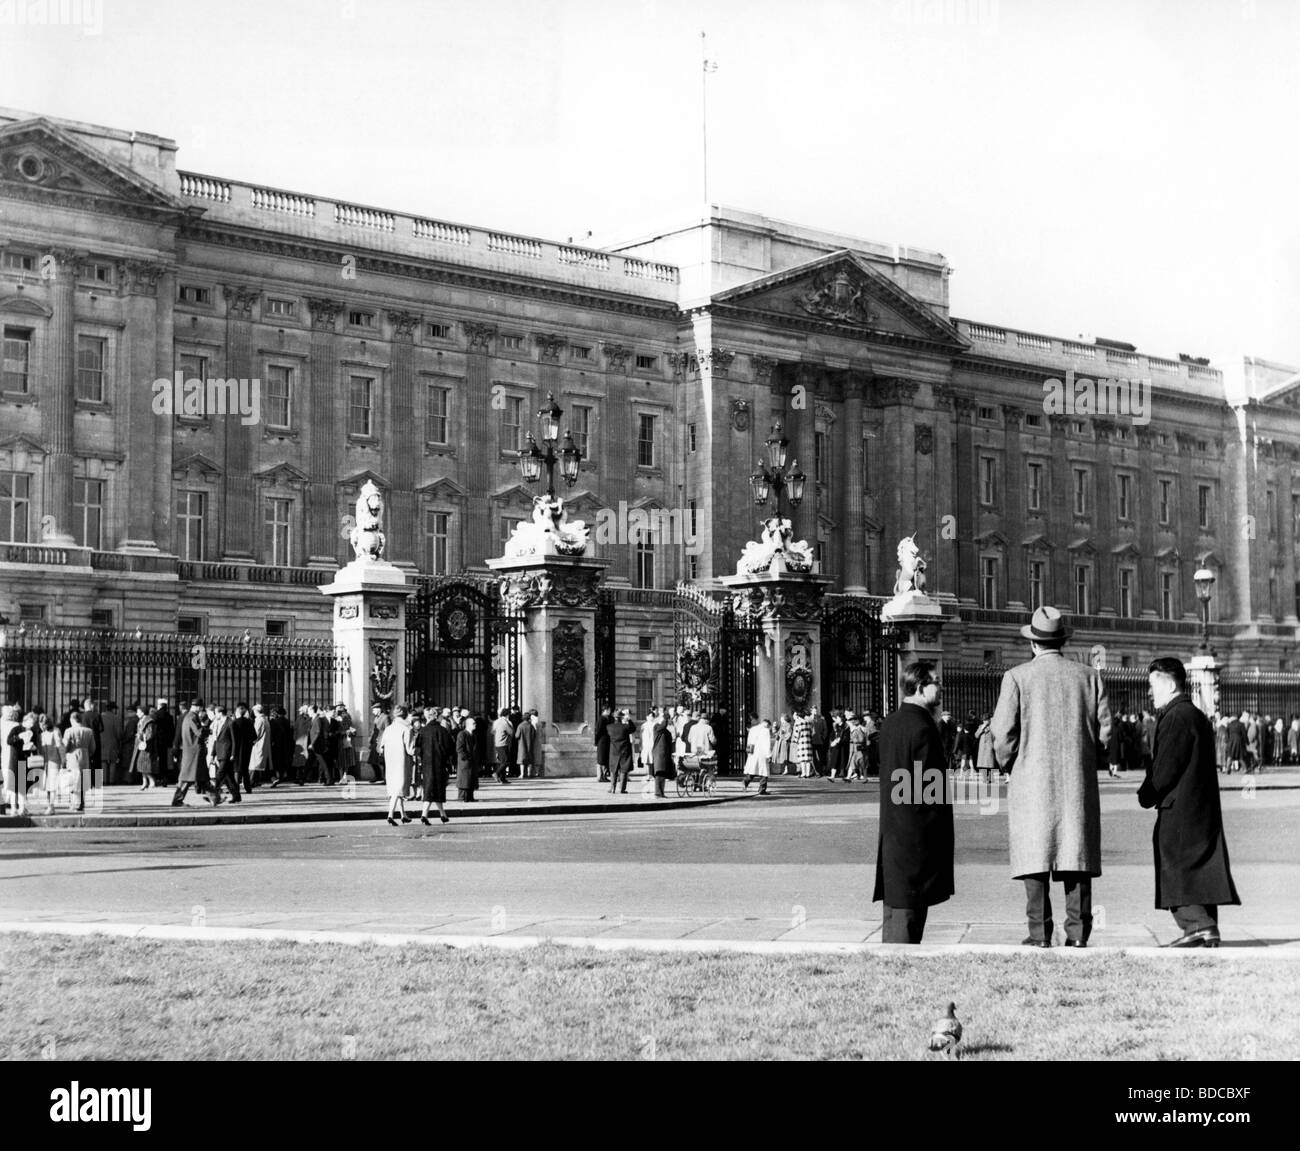 geography / travel, Great Britain, London, buildings, Buckingham Palace and Monument for Queen Victoria, exterior view, 1950s, Stock Photo